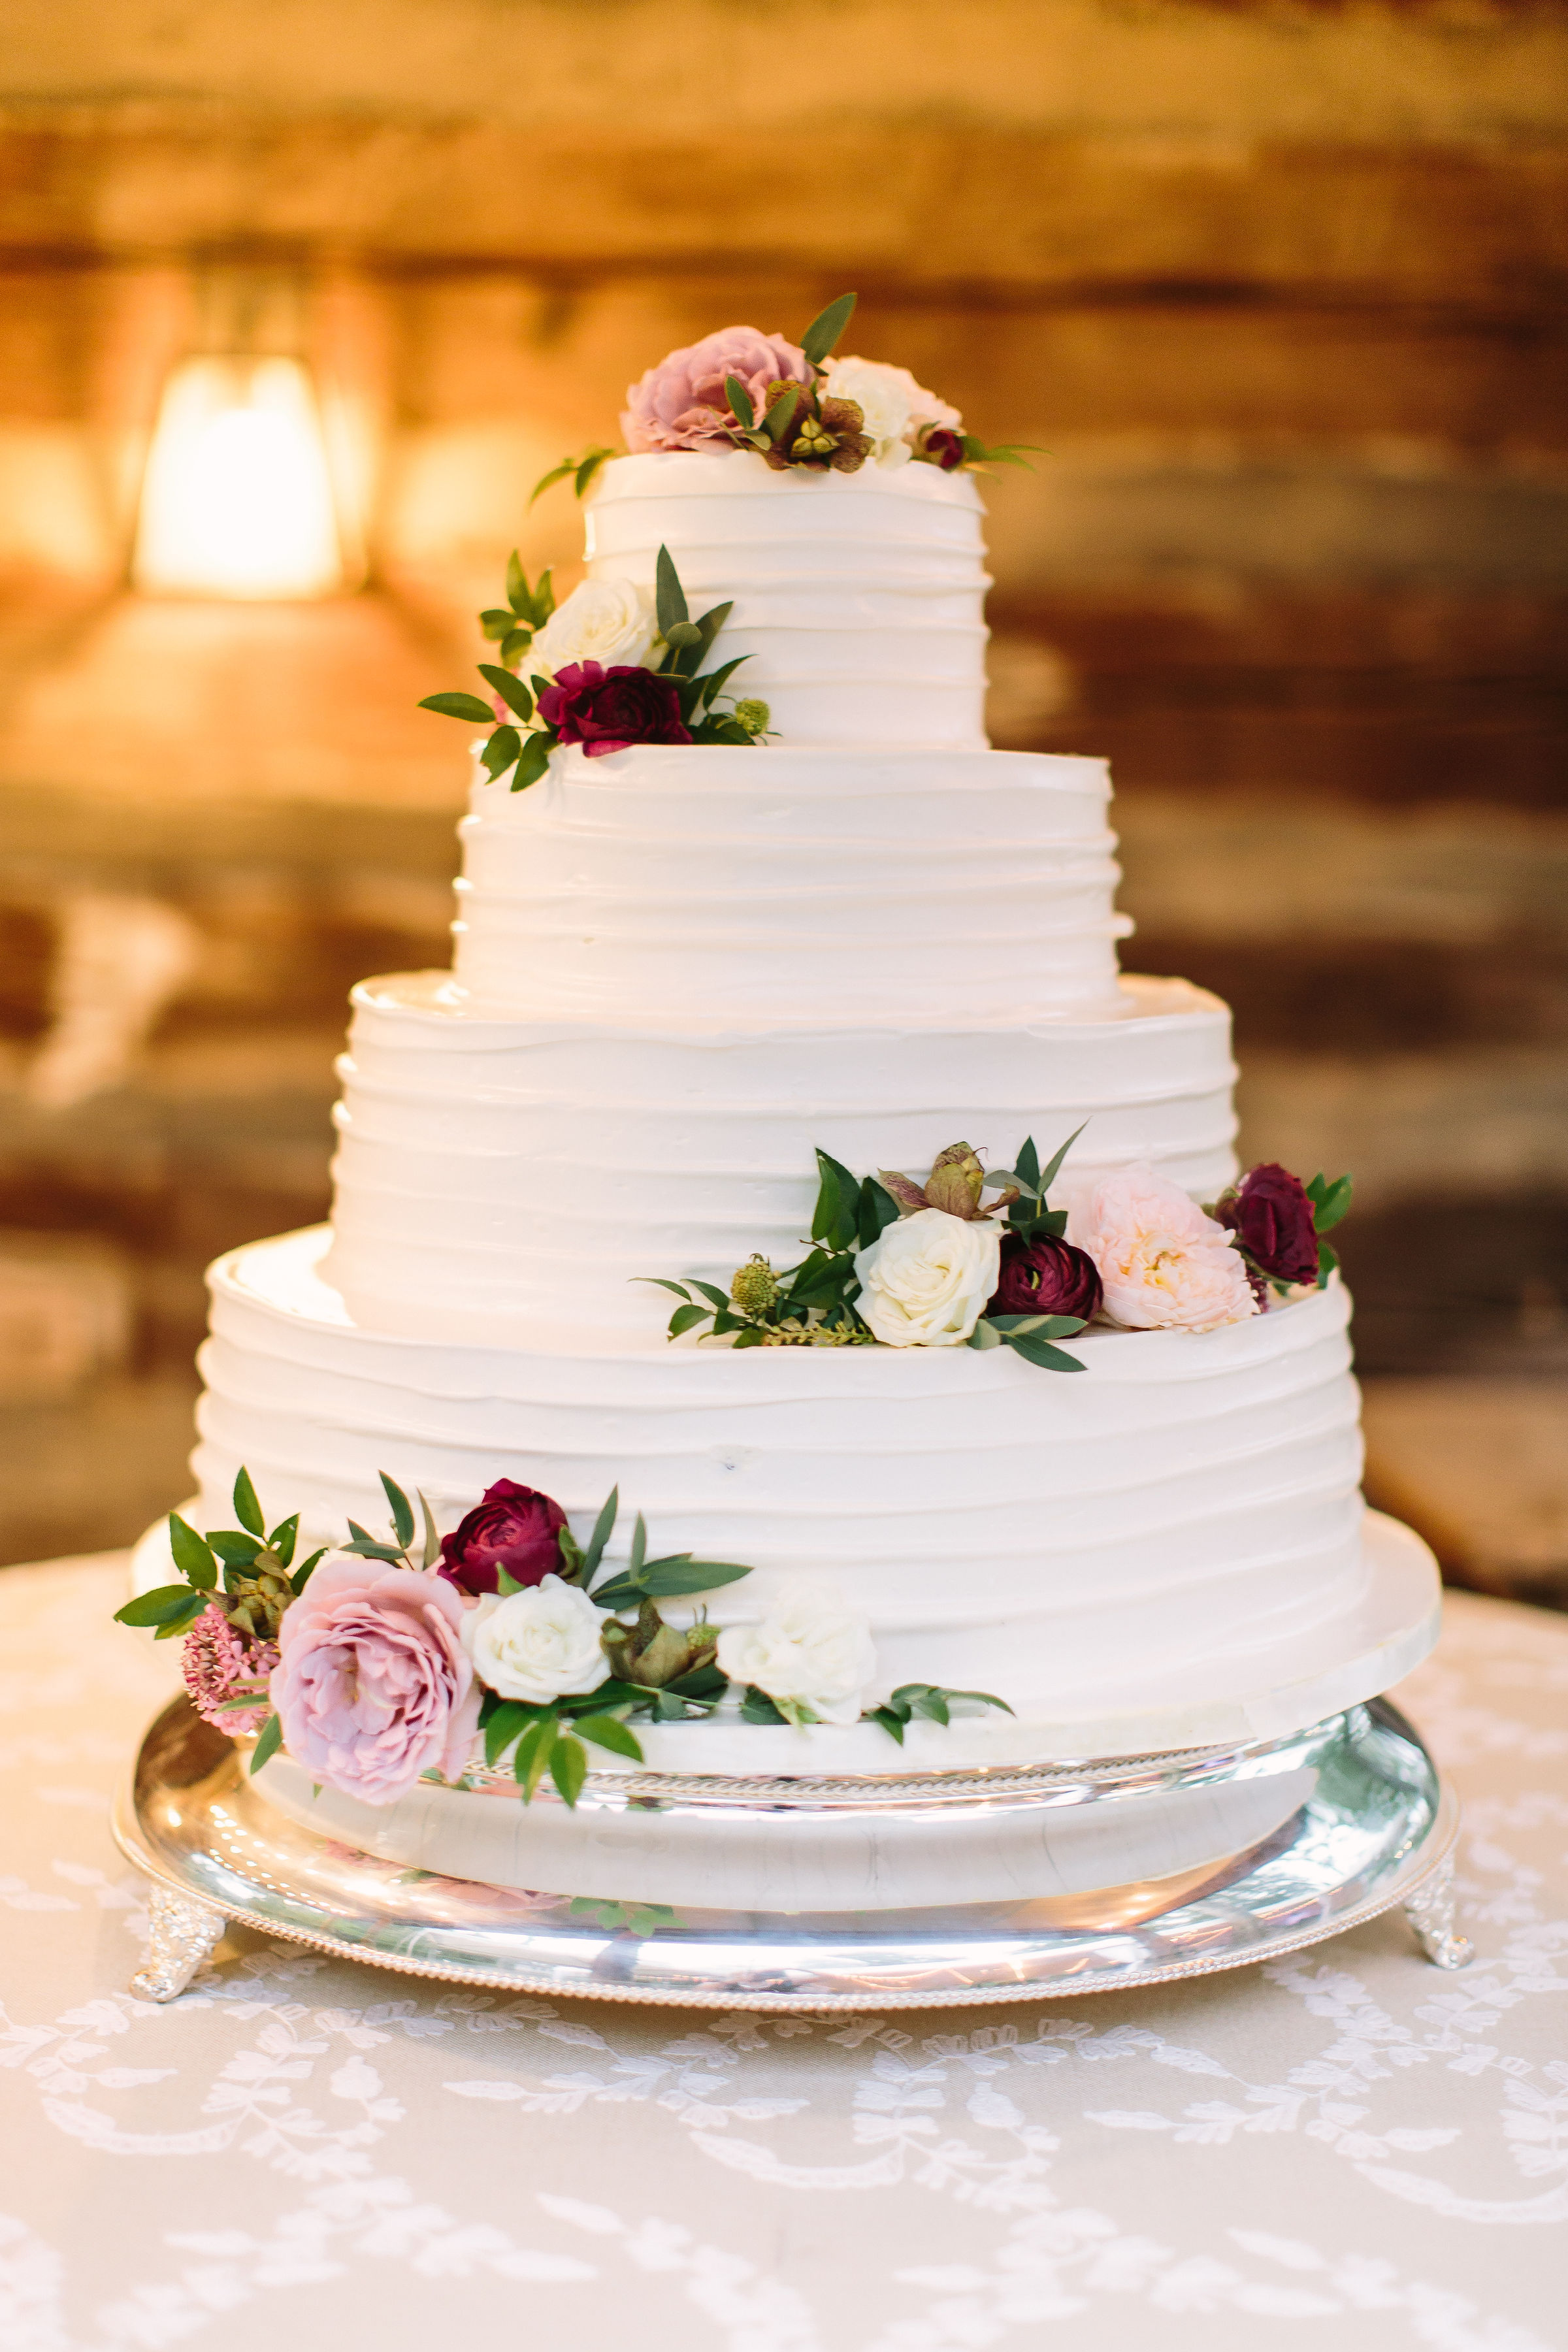 White, 4-tired wedding cake with clustered floral accents using garden roses, ranunculus, hellebores, and greenery // Nashville Wedding Floral Design